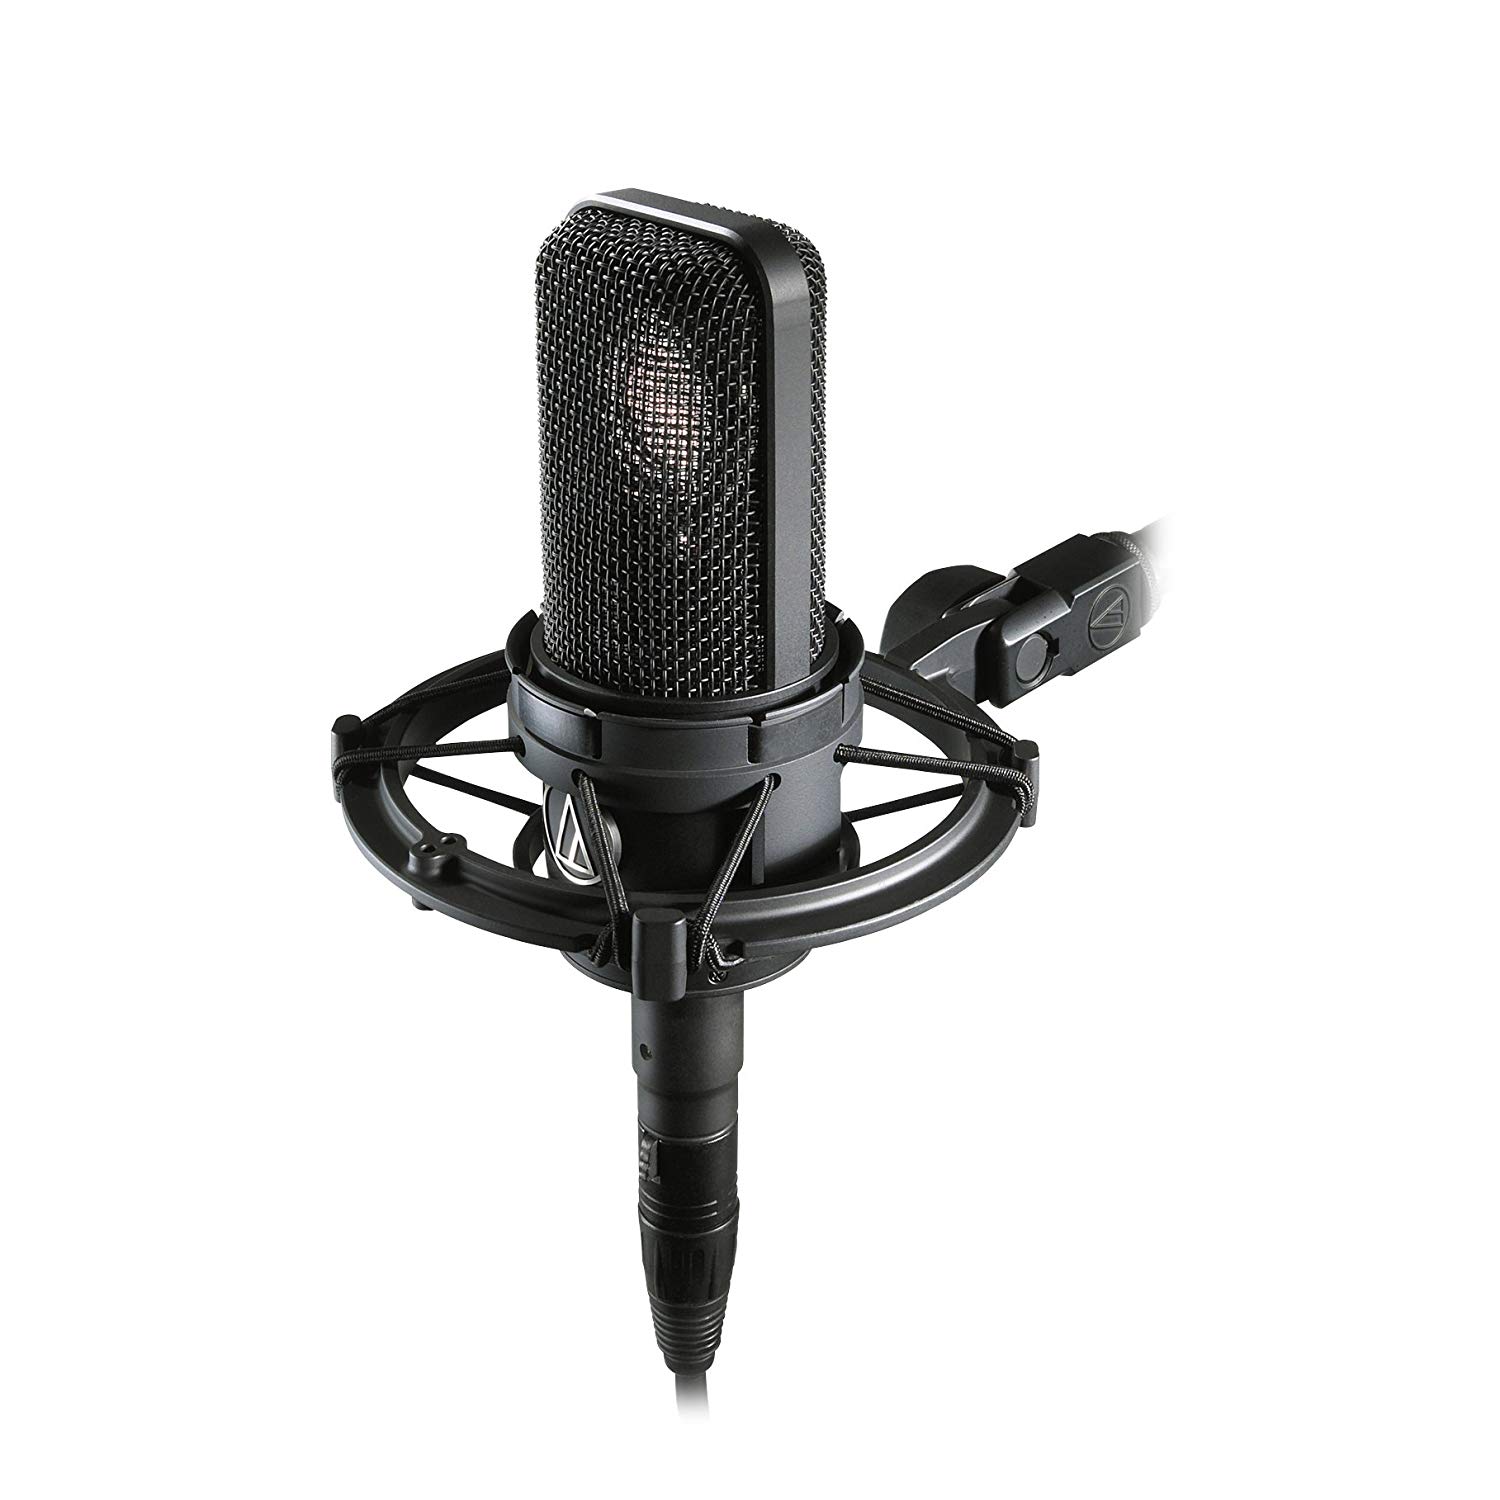 Microphone - image 3 of 4